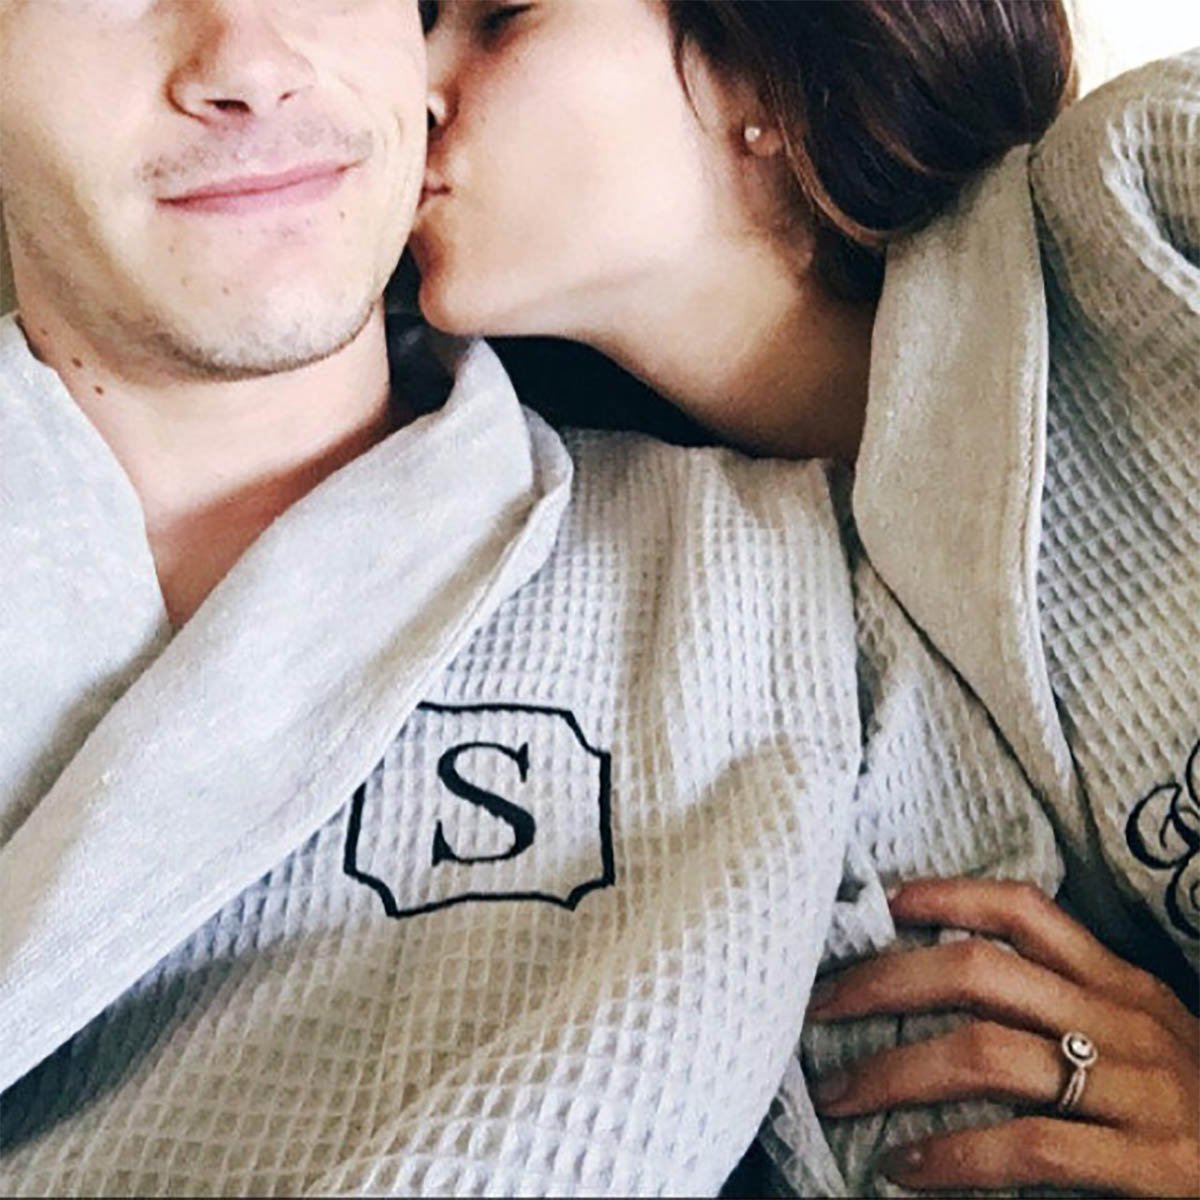 2nd Anniversary Cotton Gift for Couples, Personalized 100% Cotton Waffle/Terry Spa Robe | Made in Turkey, Monogrammed Wedding, Birthday Gift